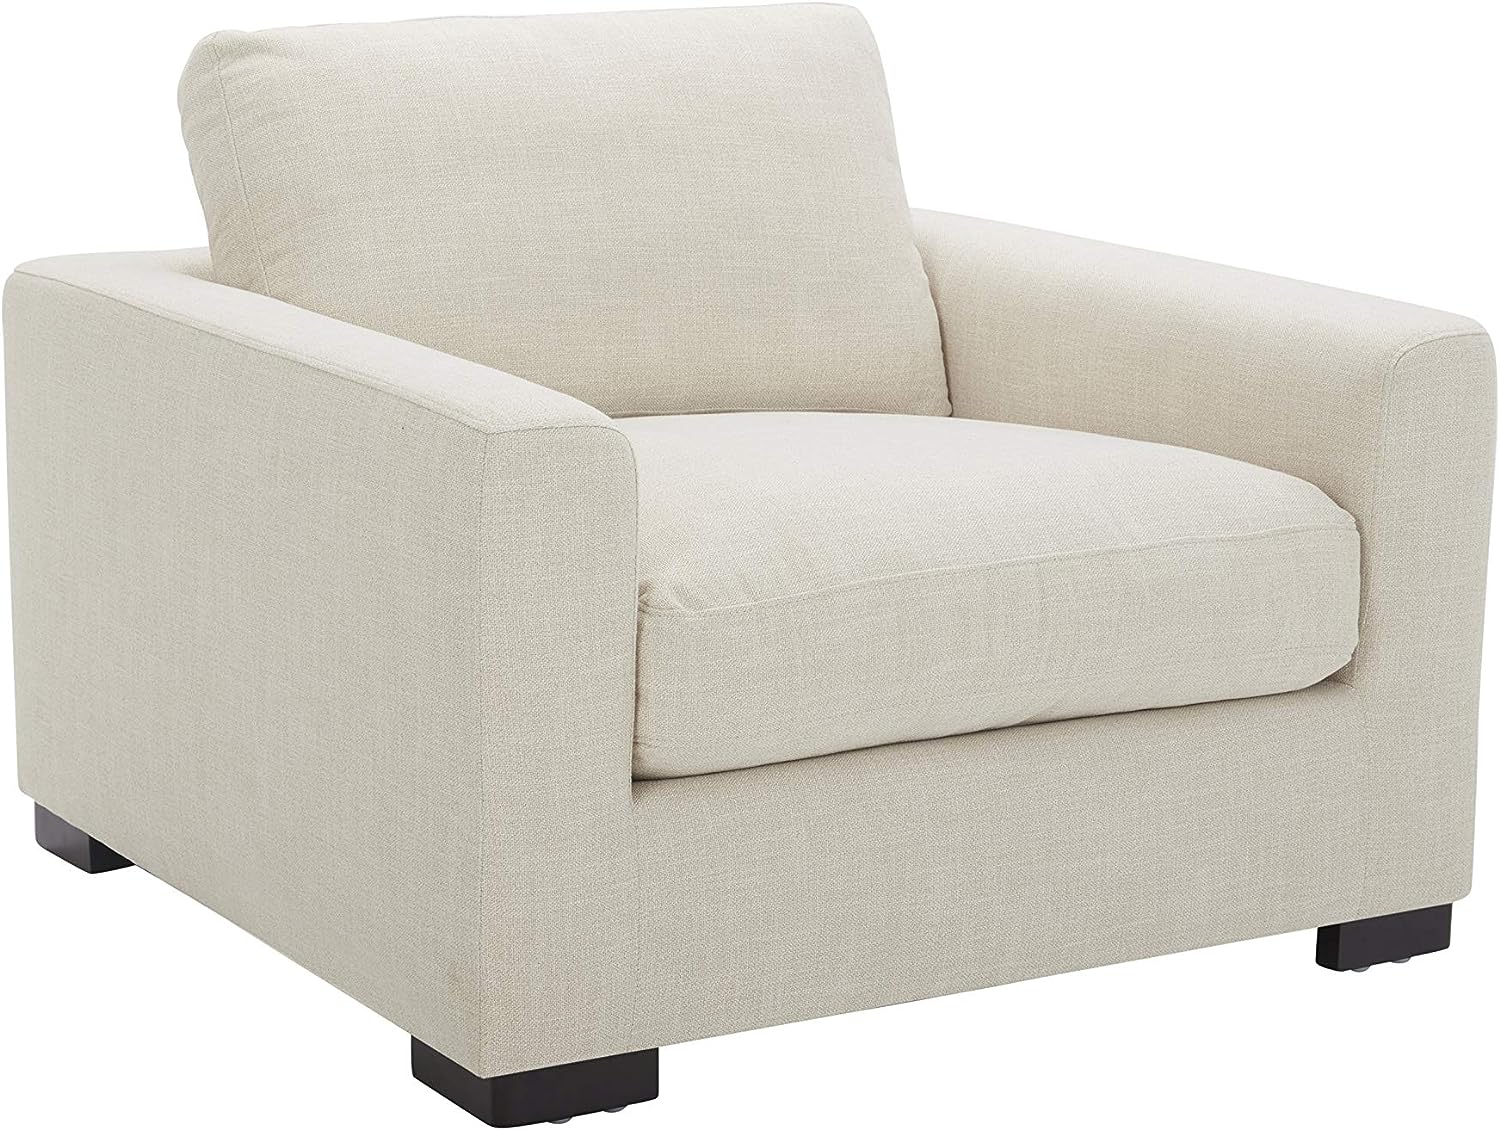 Amazon Brand - Extra-Deep Down-Filled Accent Living room Chair - $390